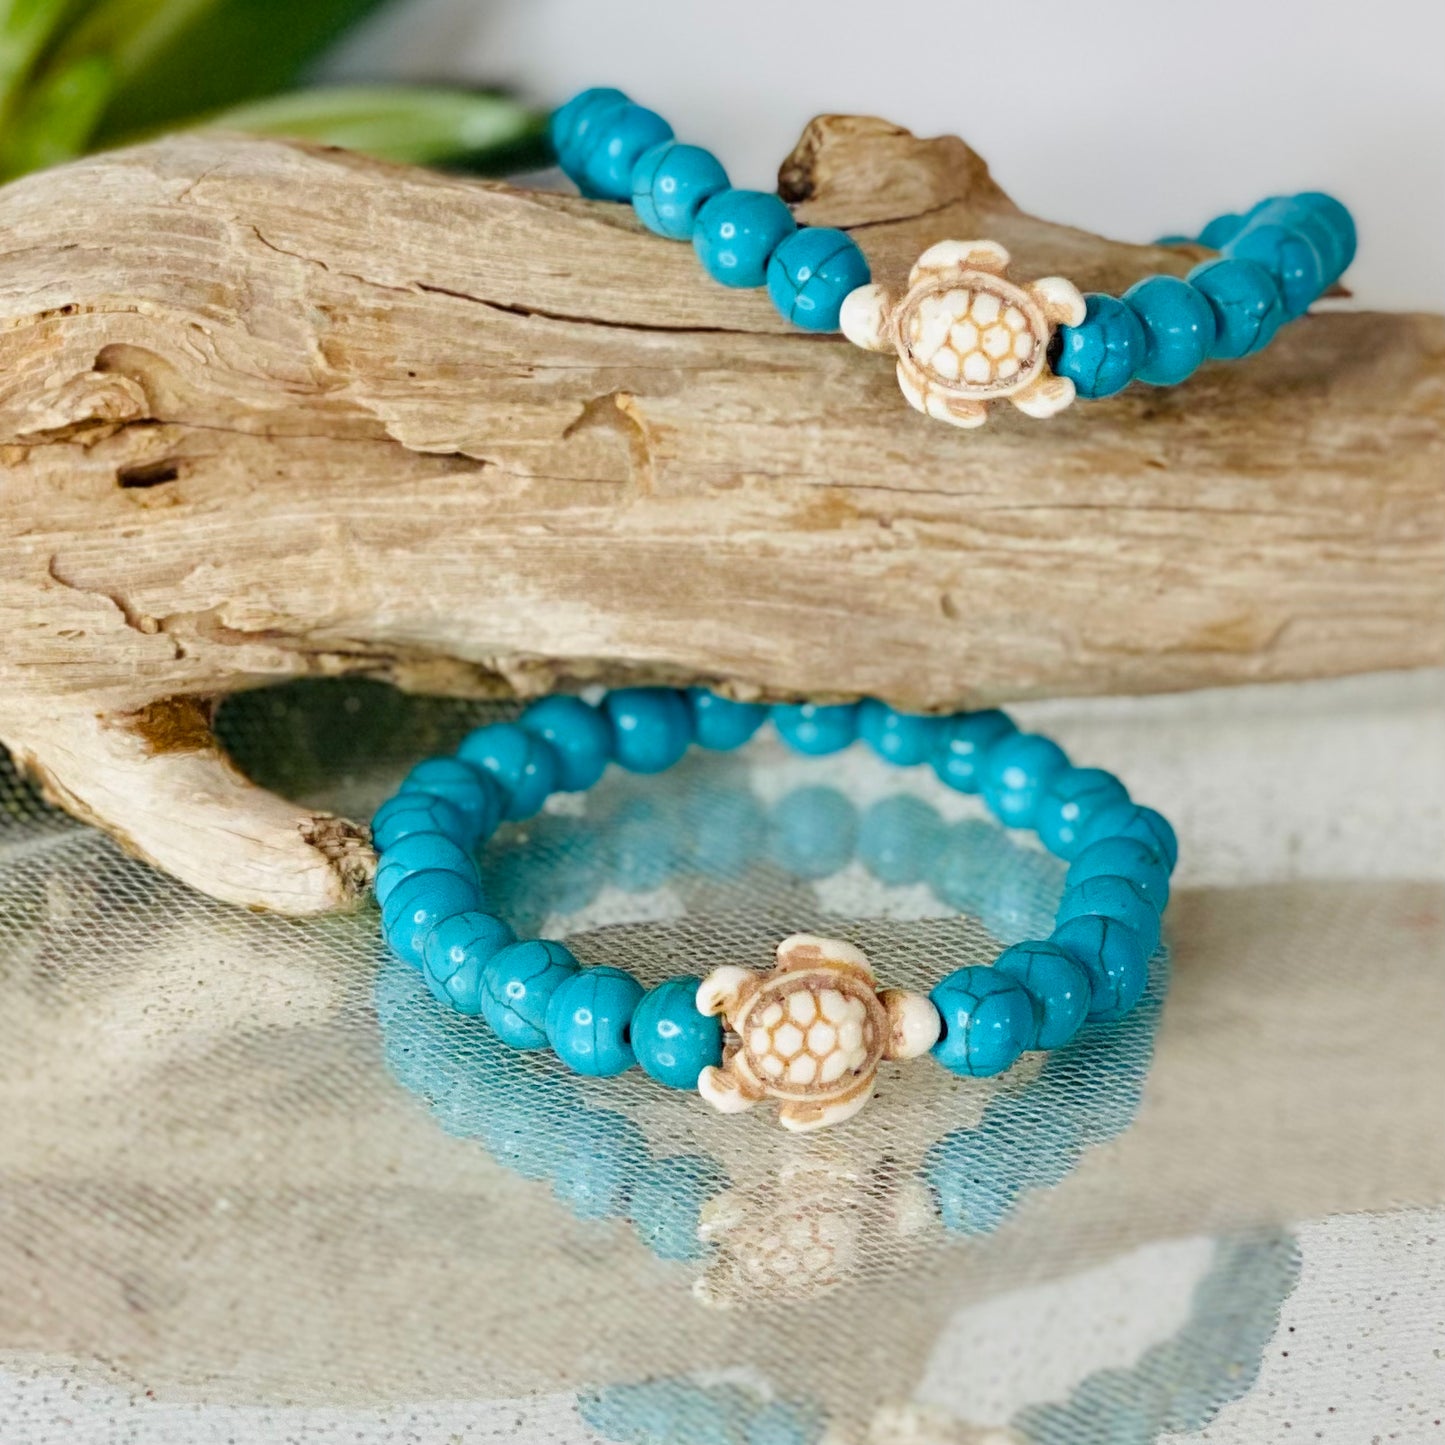 Blue Howlite or Black Bead 7-Inch Stretch Crystal Bracelet with Adorable Turtle Charm